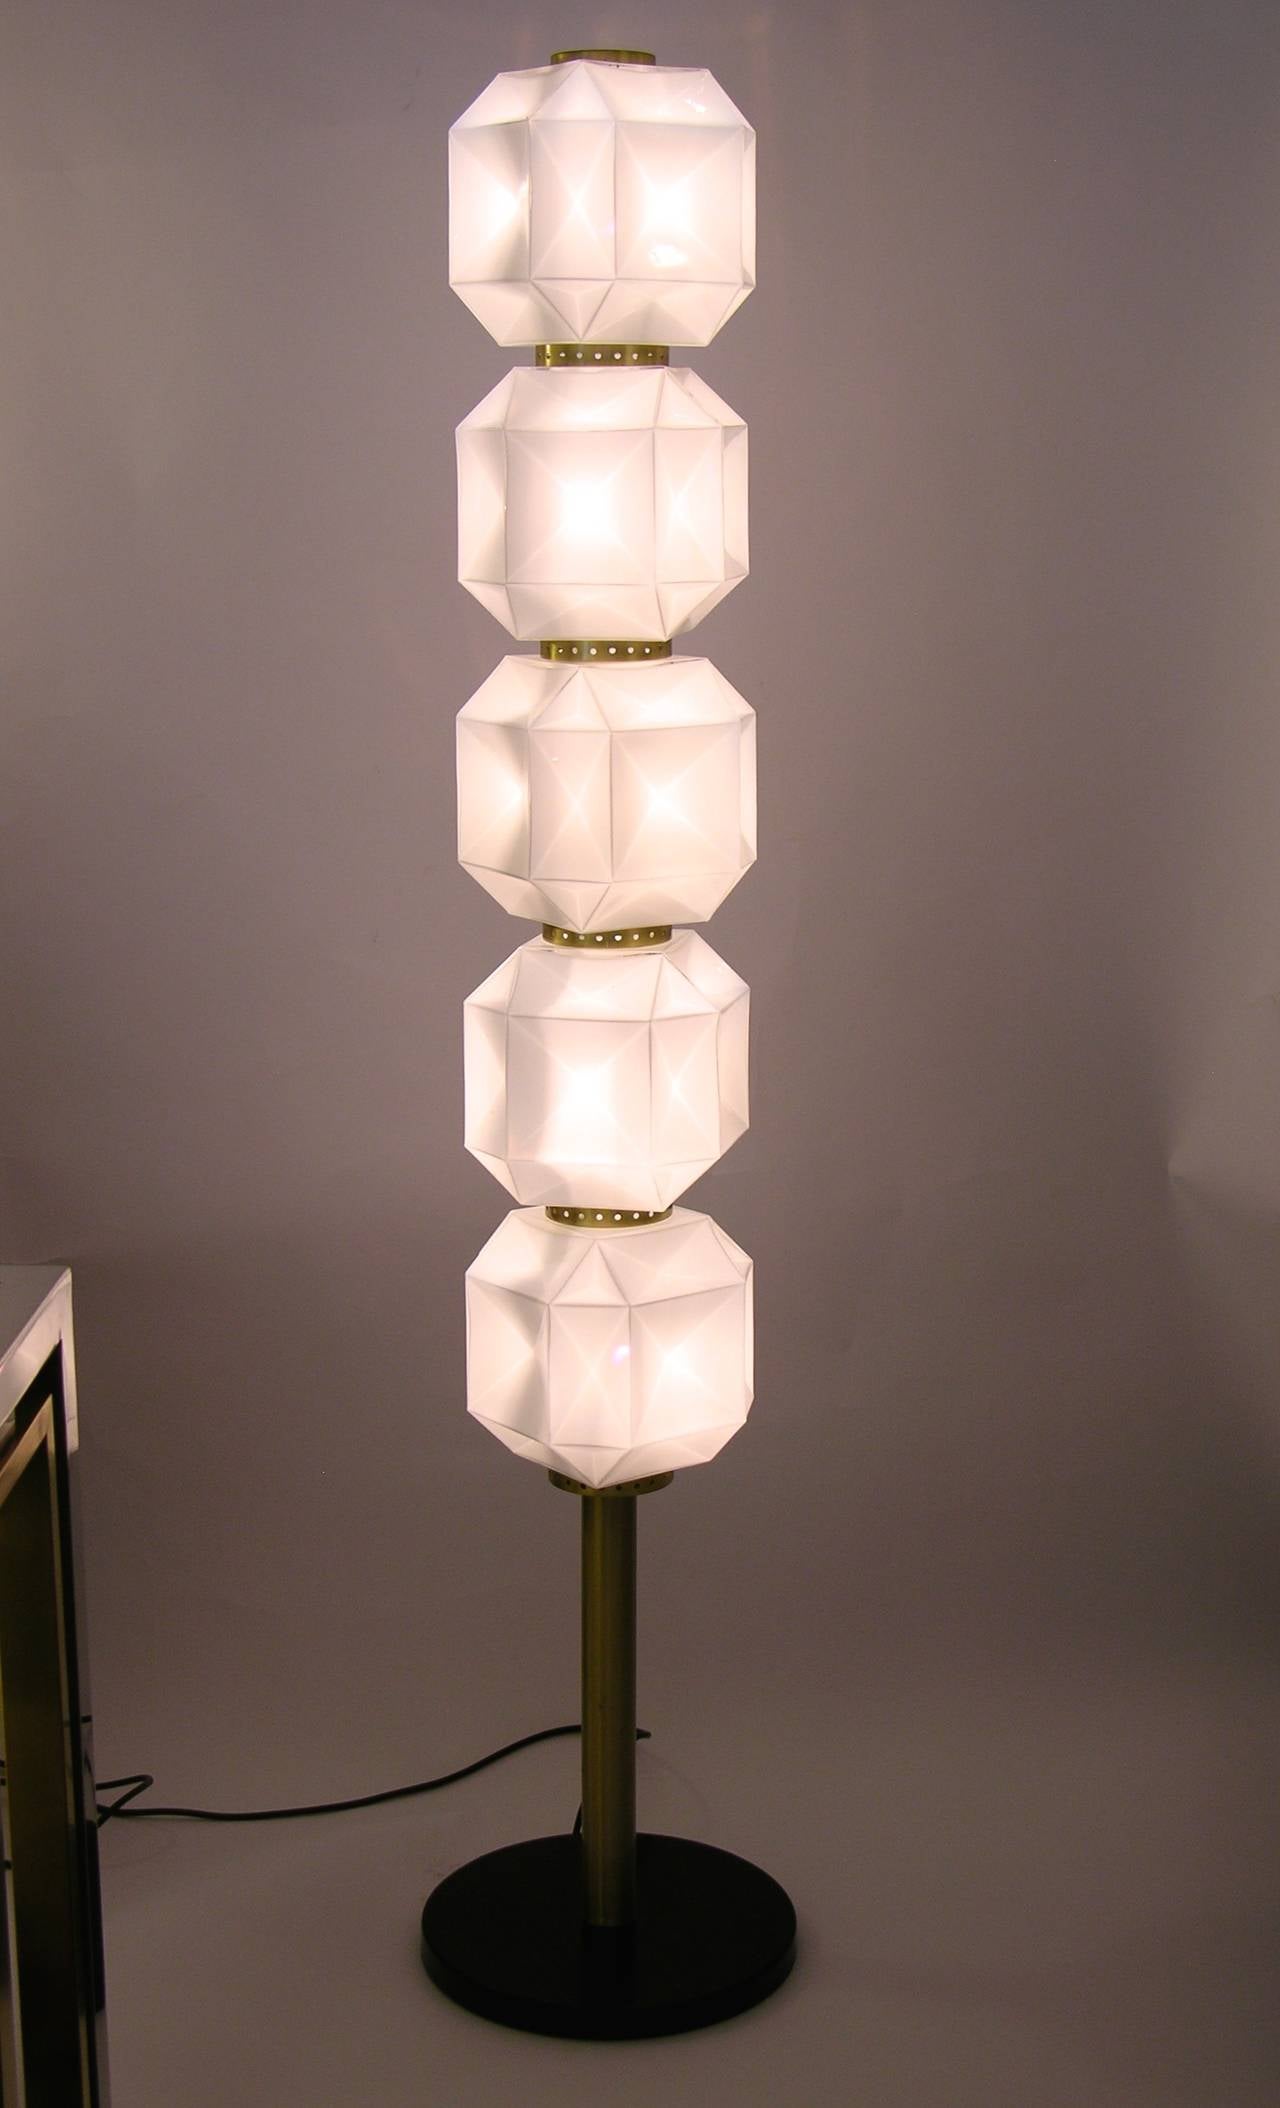 Unique floor lamp, made in Italy, with five diamond-shaped milk glass elements on a gilt brass stem supported by a black painted round metal base. Every piece is in white glass overlaid in clear, each individually blown within a mould, set one above